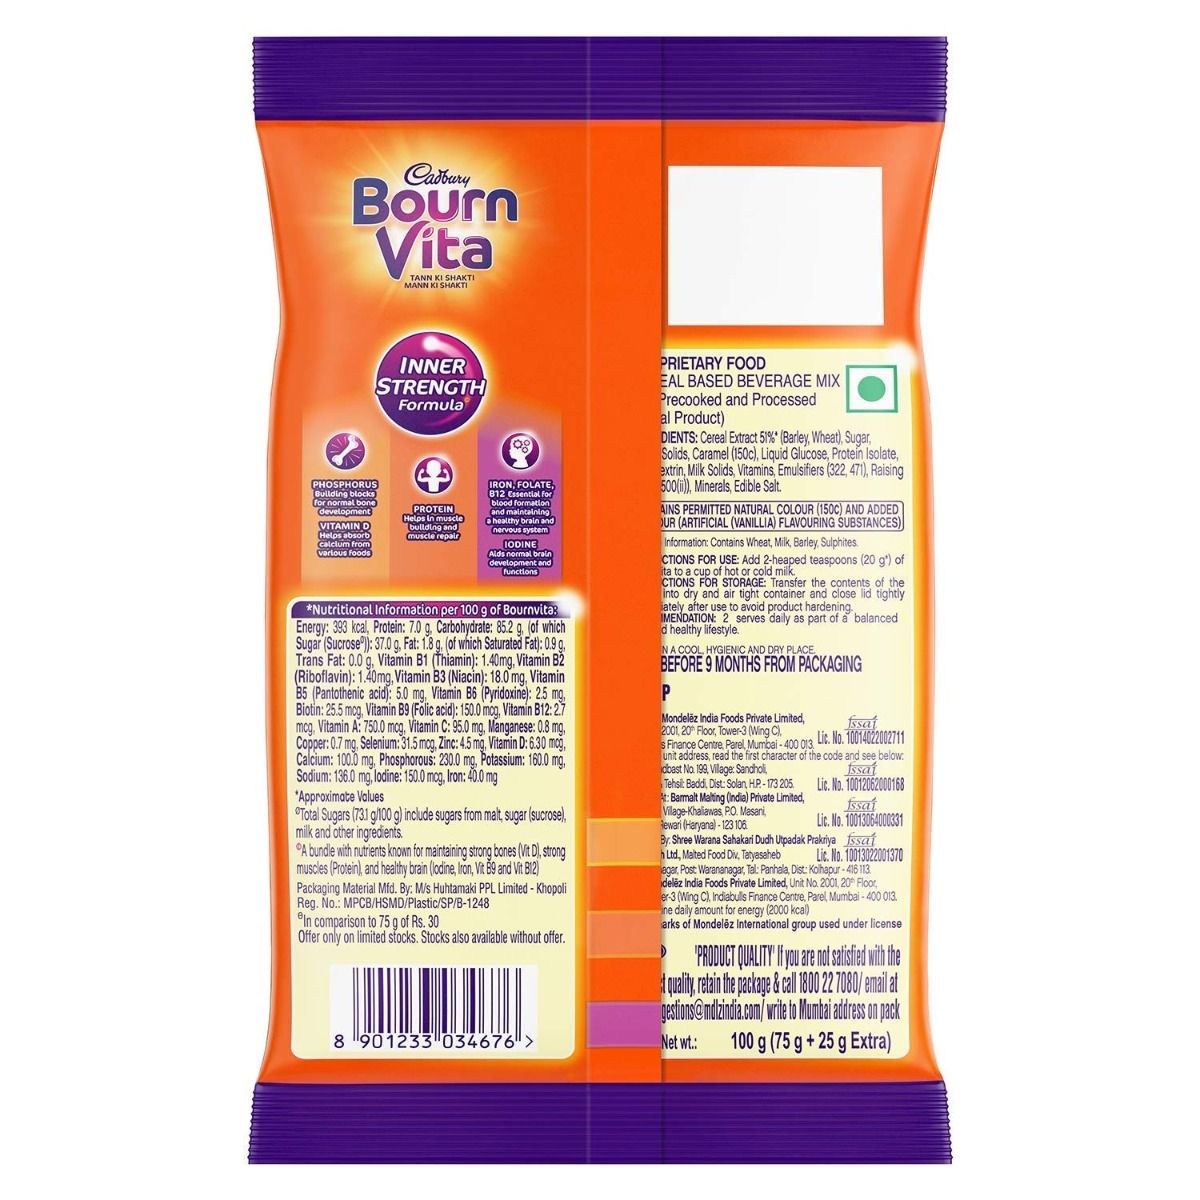 Bournvita Nutrition Drink, 75 gm Refill Pack, Pack of 1 